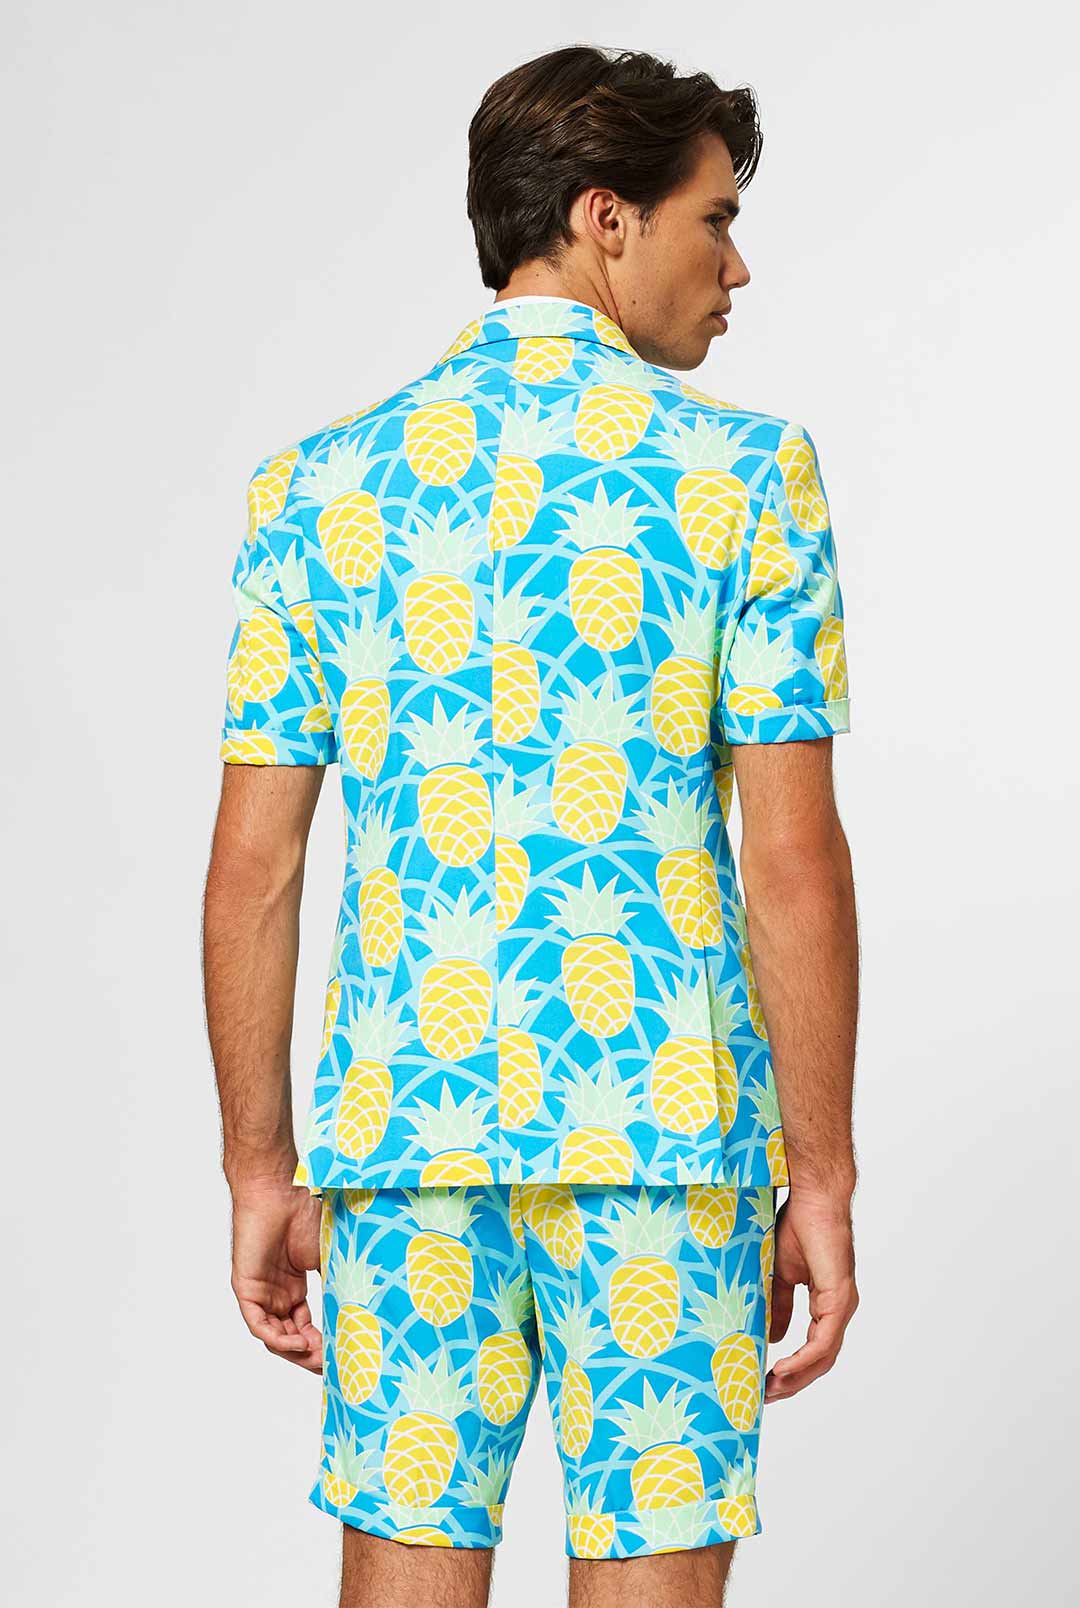 Summer Shineapple Summer Suit With Pineapple Print Opposuits